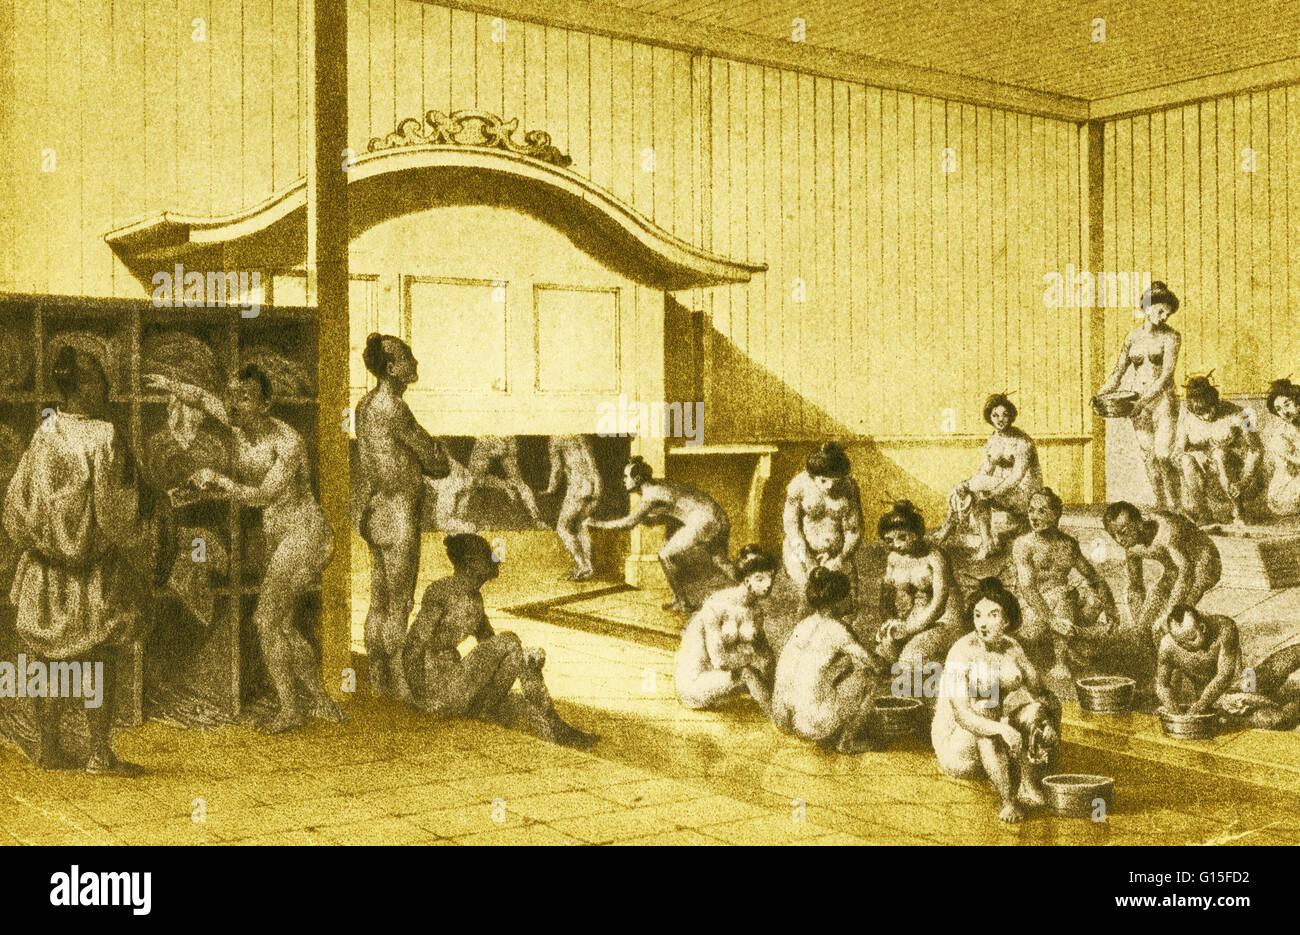 Two accredited artists accompanied Perry to Japan and their sketches were published in his official report to Congress. This one shows Japanese men and women bathing together, caused a Congressional furor and was later suppressed. According to Perry, the Stock Photo